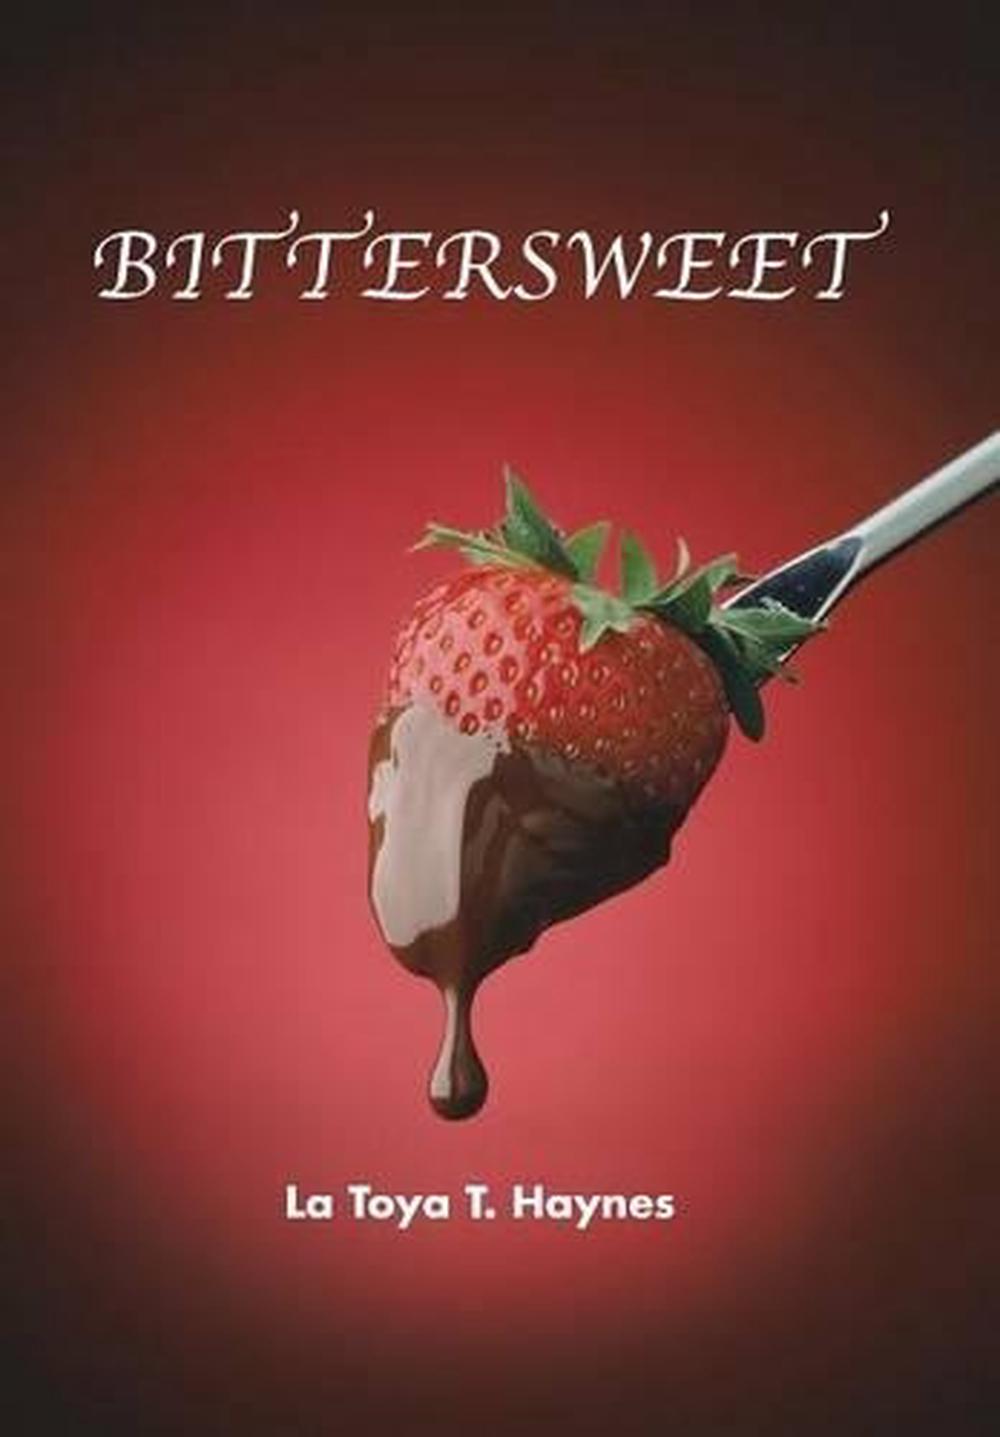 bittersweet book colleen mccullough